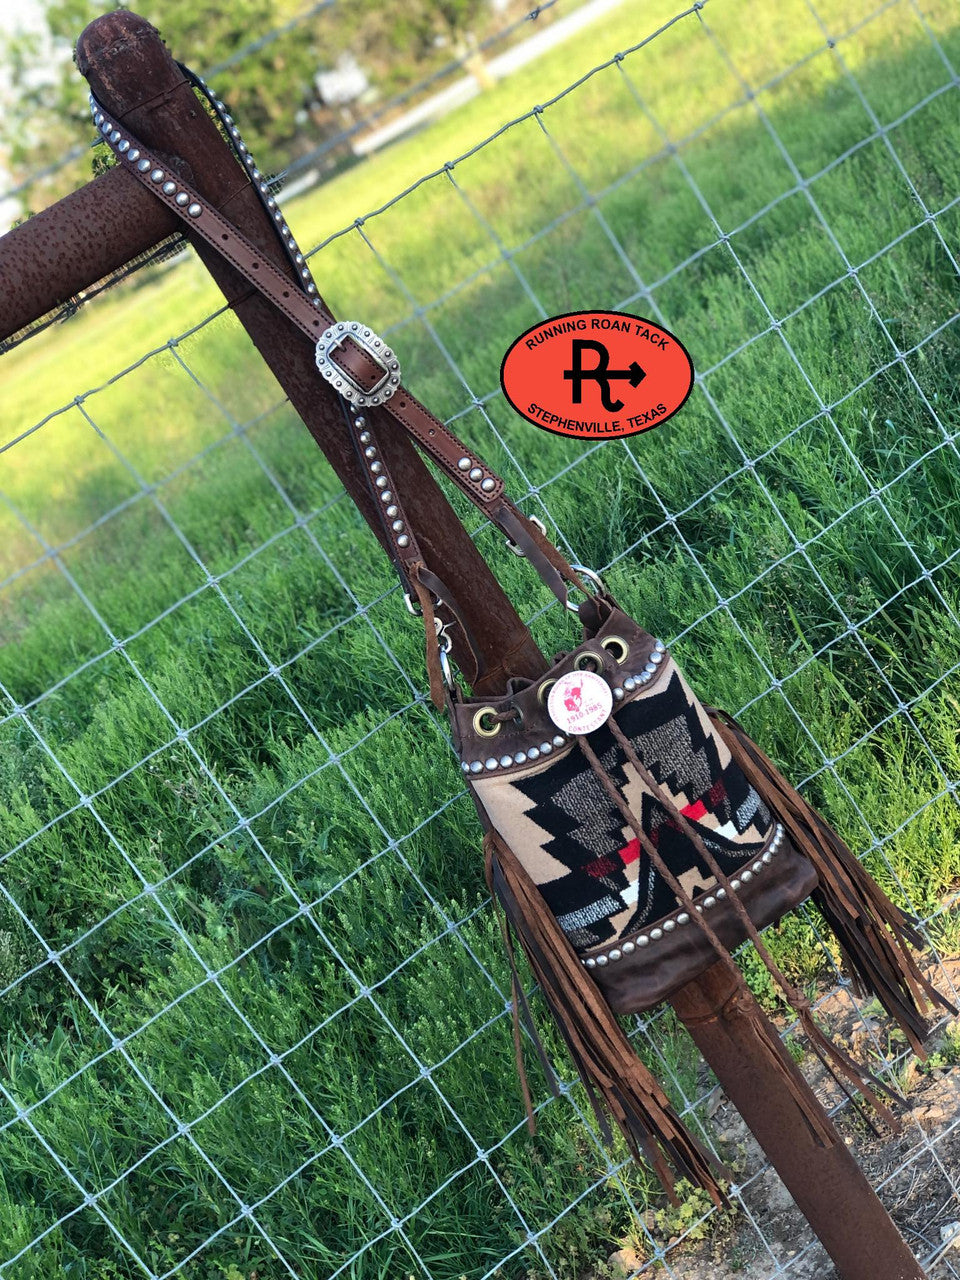 No. 02 - "The Bolo" Cross Body Fringed Bucket Bag with Wool and Antique 1985 Pendleton Round-Up Contestant Pin